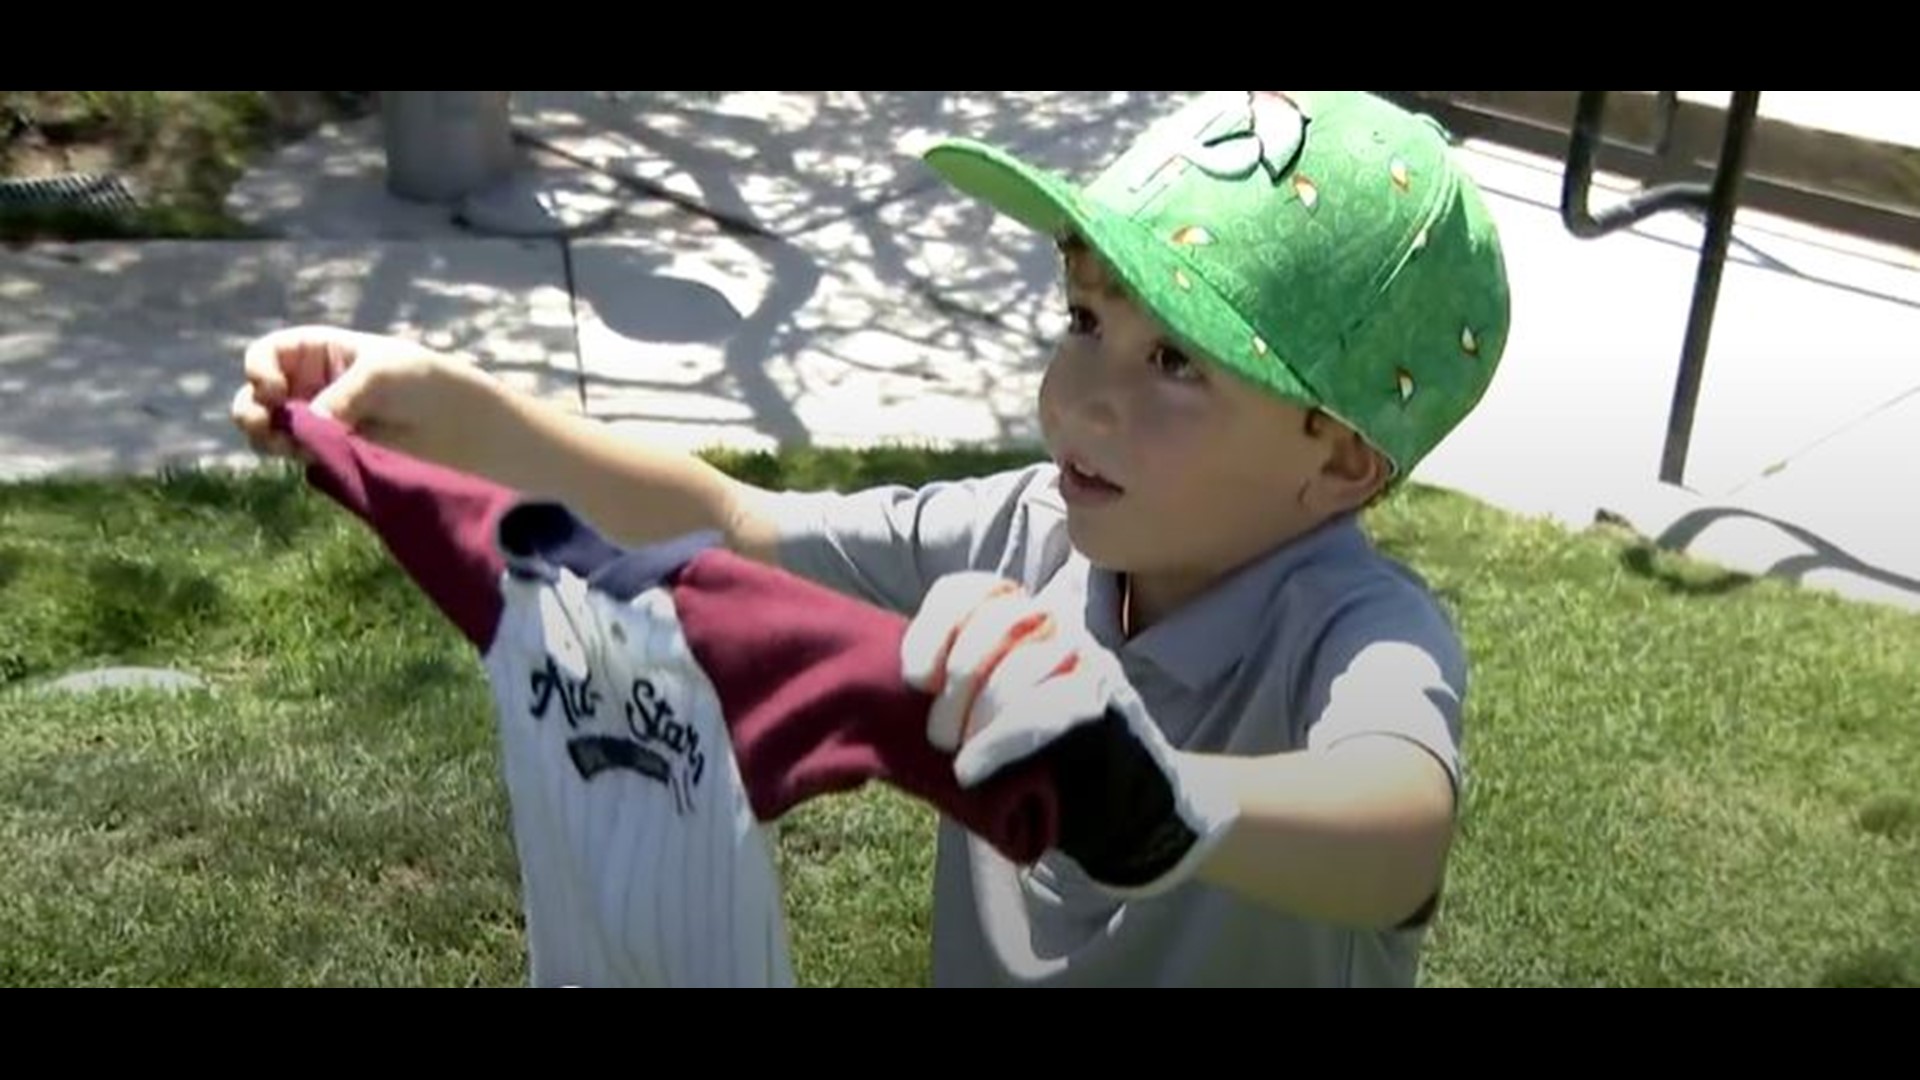 5-year-old golfer, Mikey Manka, who lives with Cerebral Palsy is honored at a golf course before a fundraiser hoping to raise money for the disease's cure.